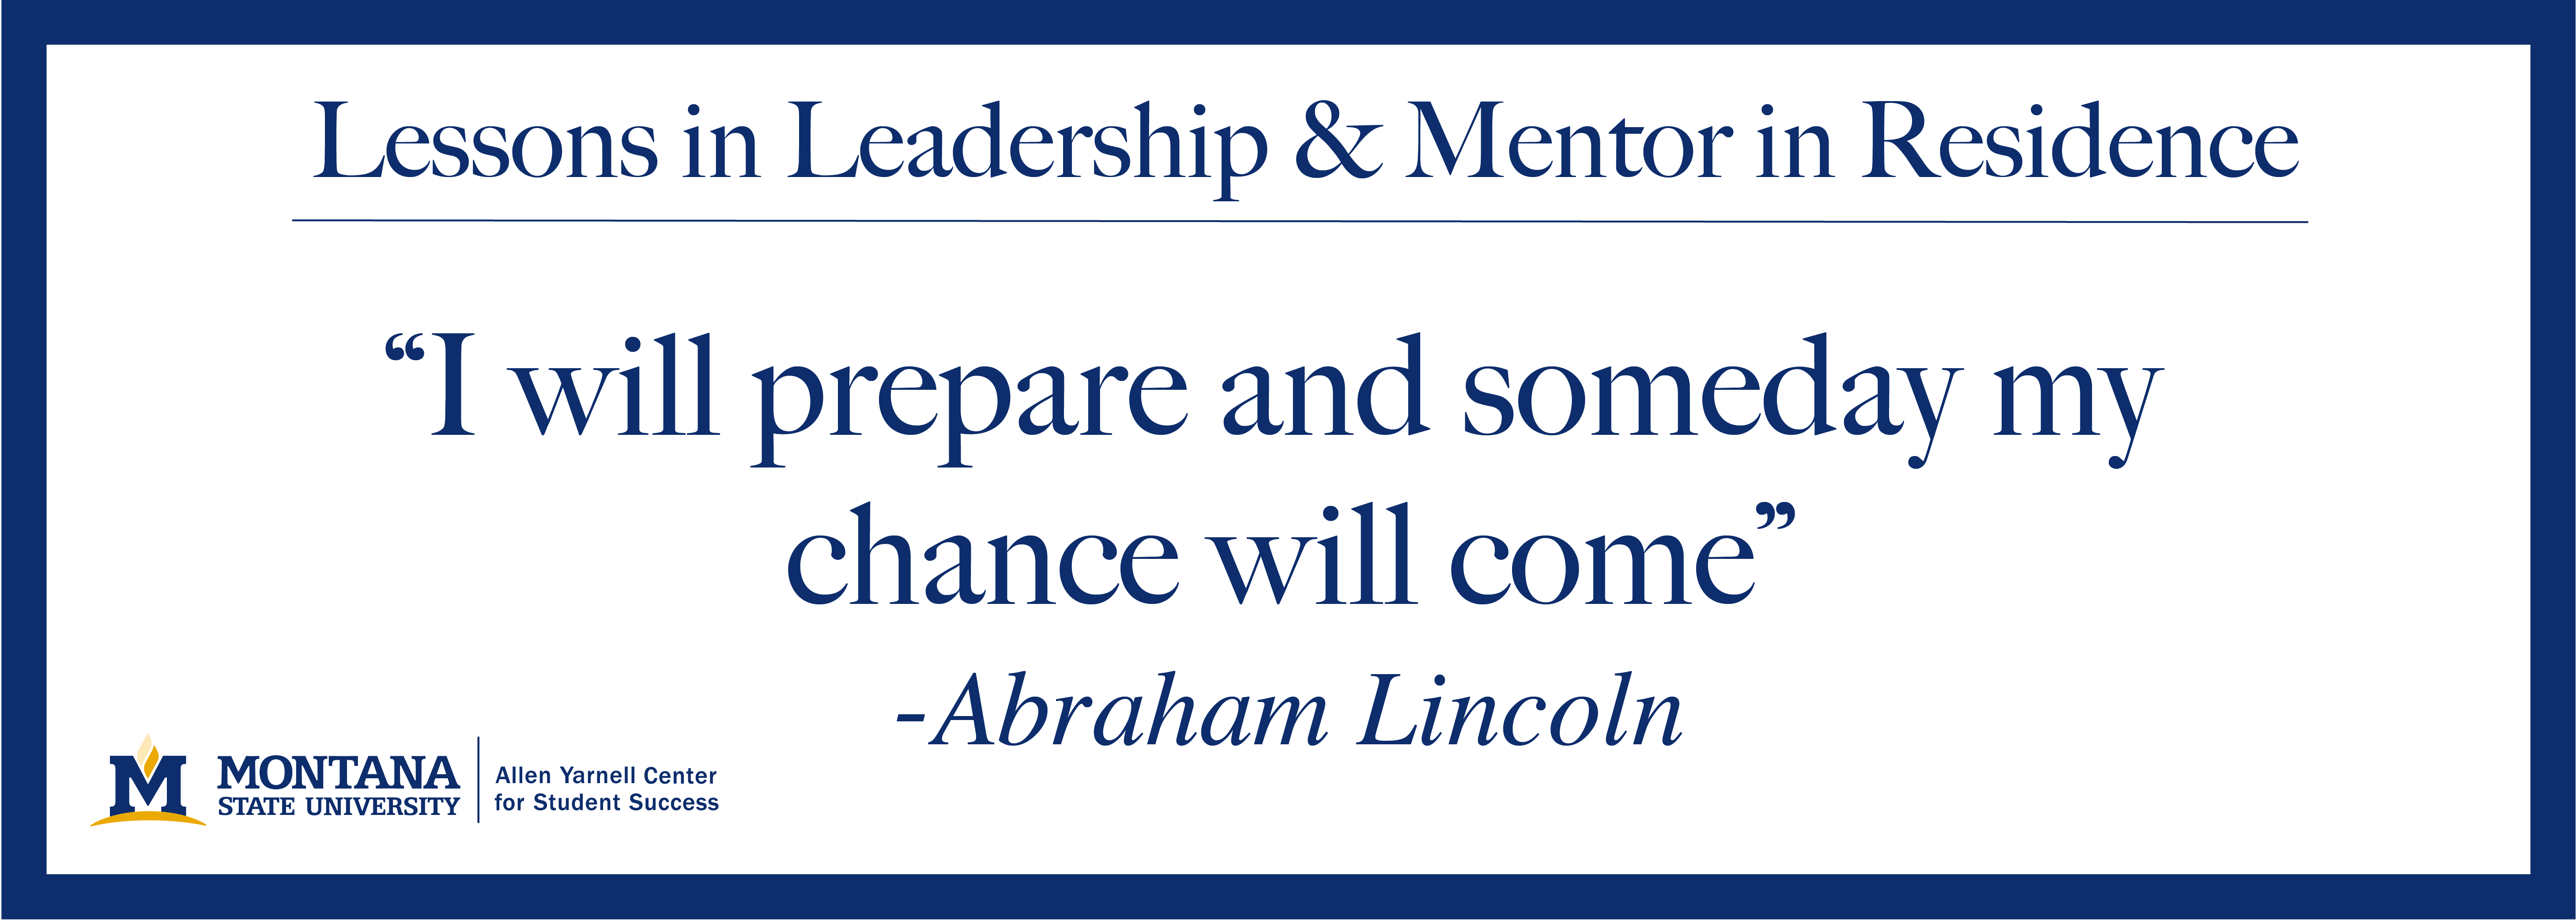 Lessons in leadership & mentor in residence: "I will prepare and someday my chance will come" -Abraham Lincoln